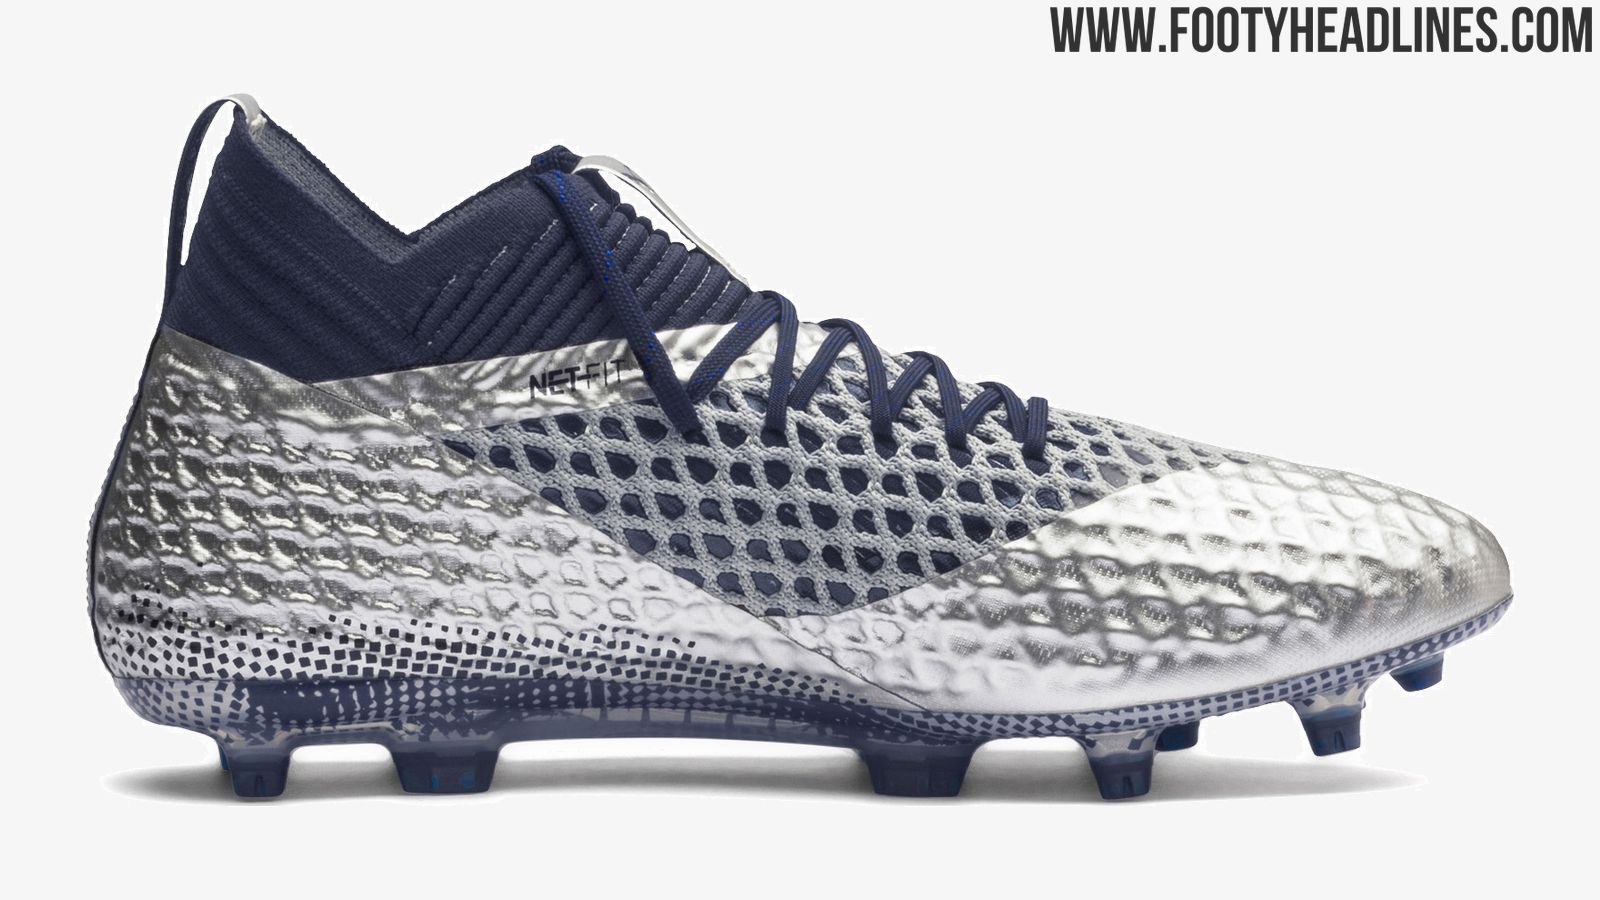 Silver / Navy Puma Future 2 Netfit 'Stun Pack' Boots Leaked - Footy ...